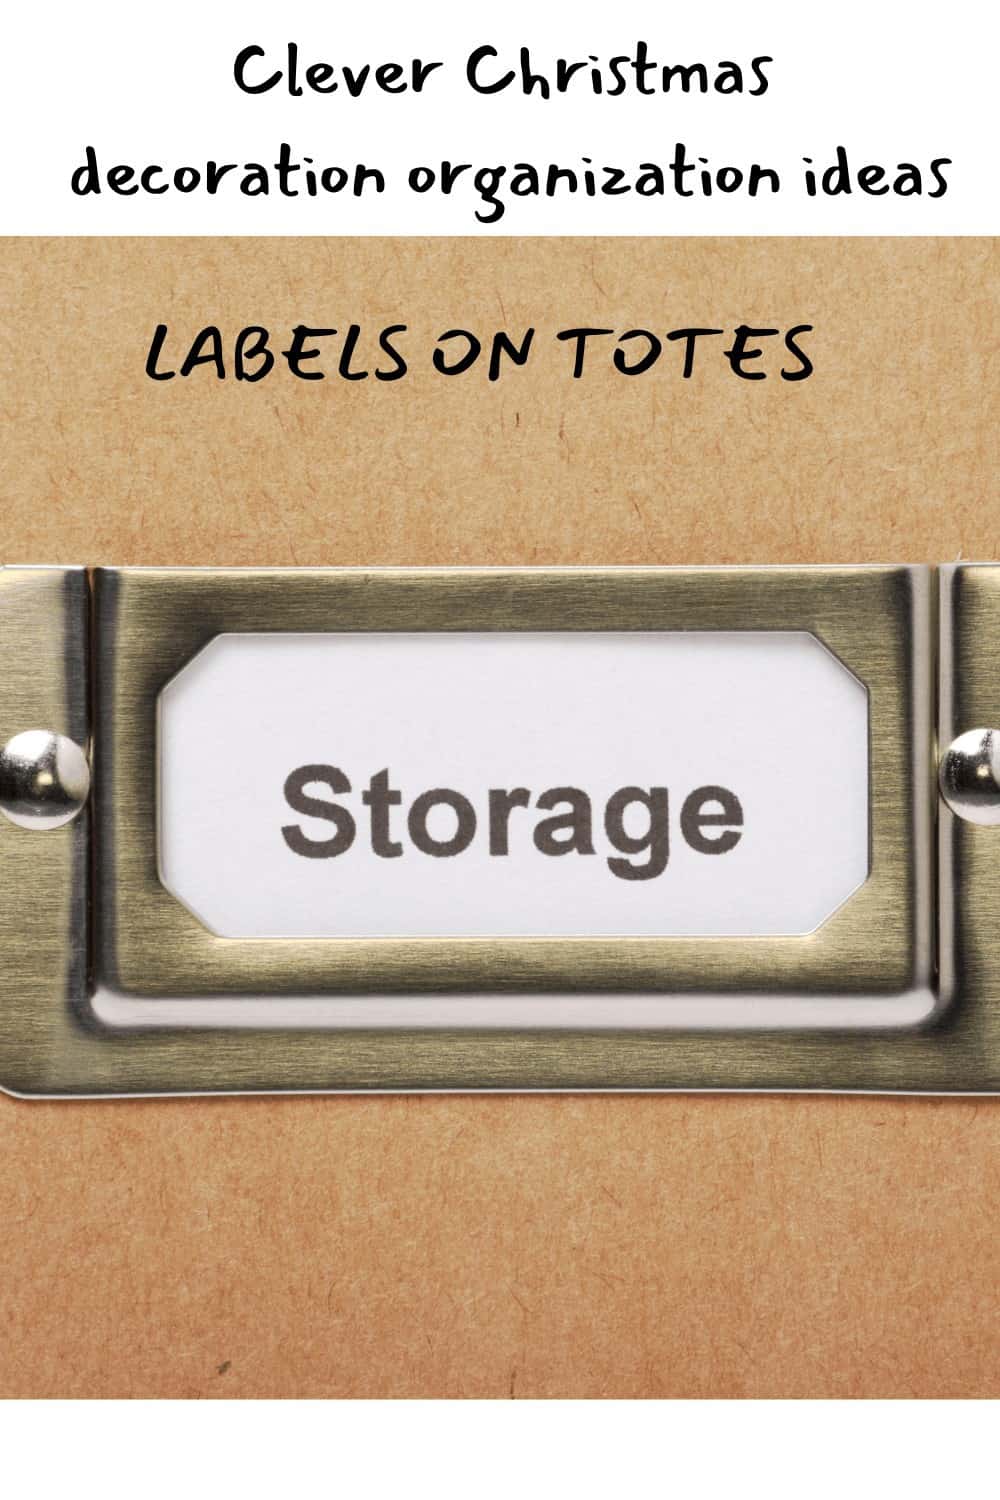 LABELS FOR STORAGE 